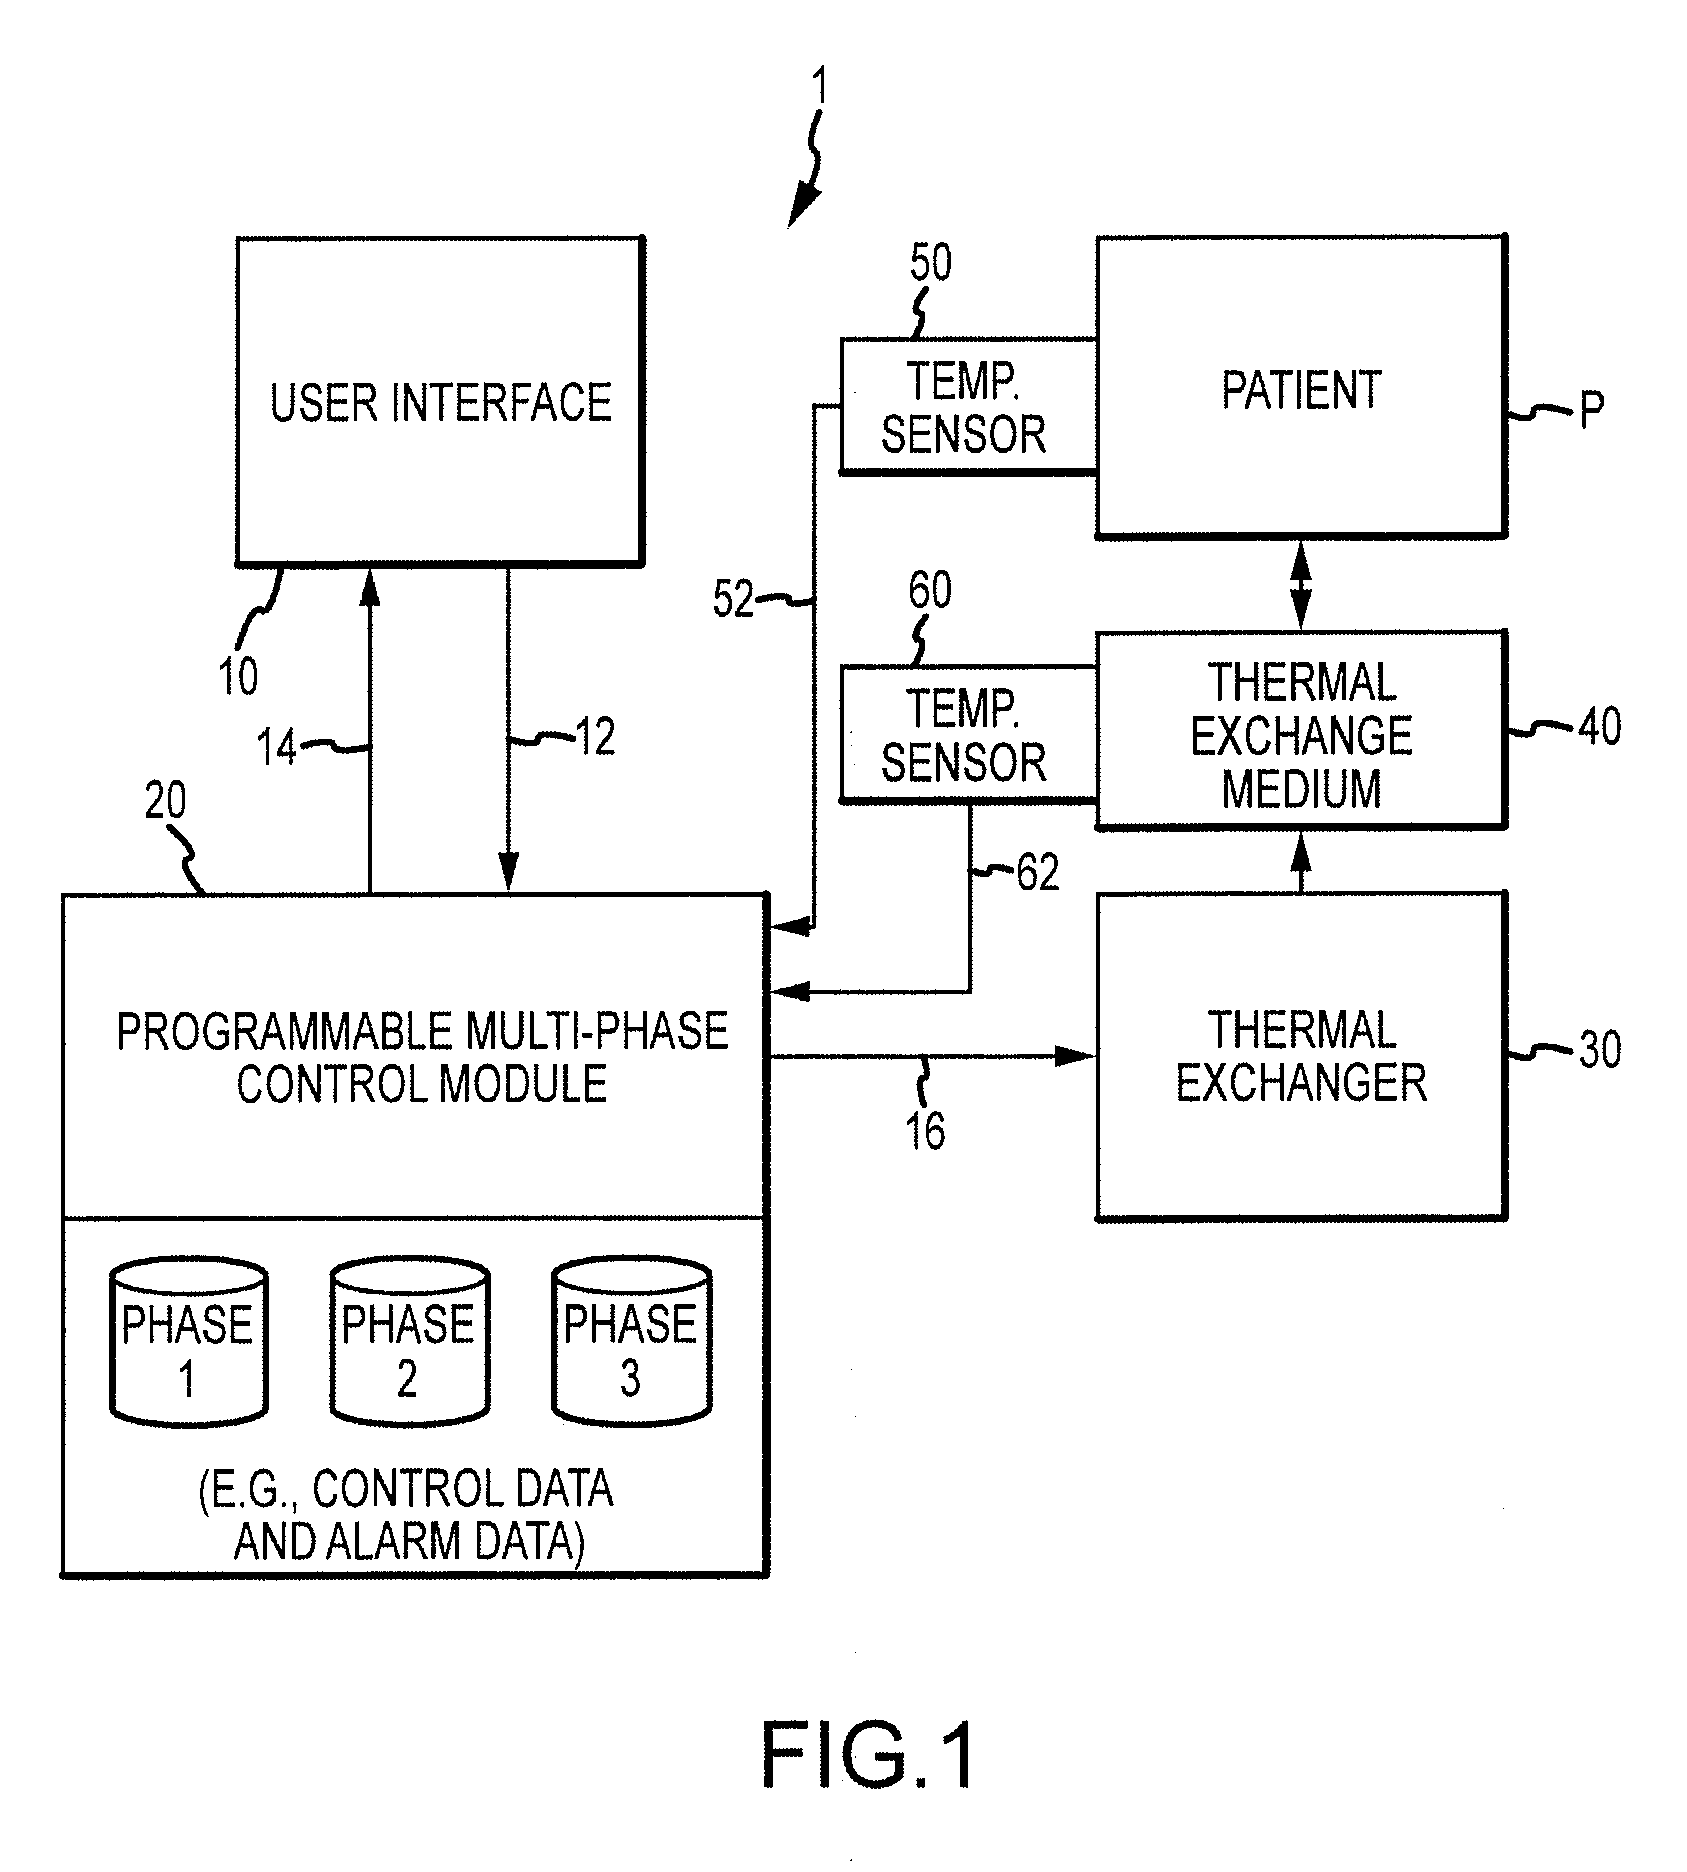 System and method for patient temperature control